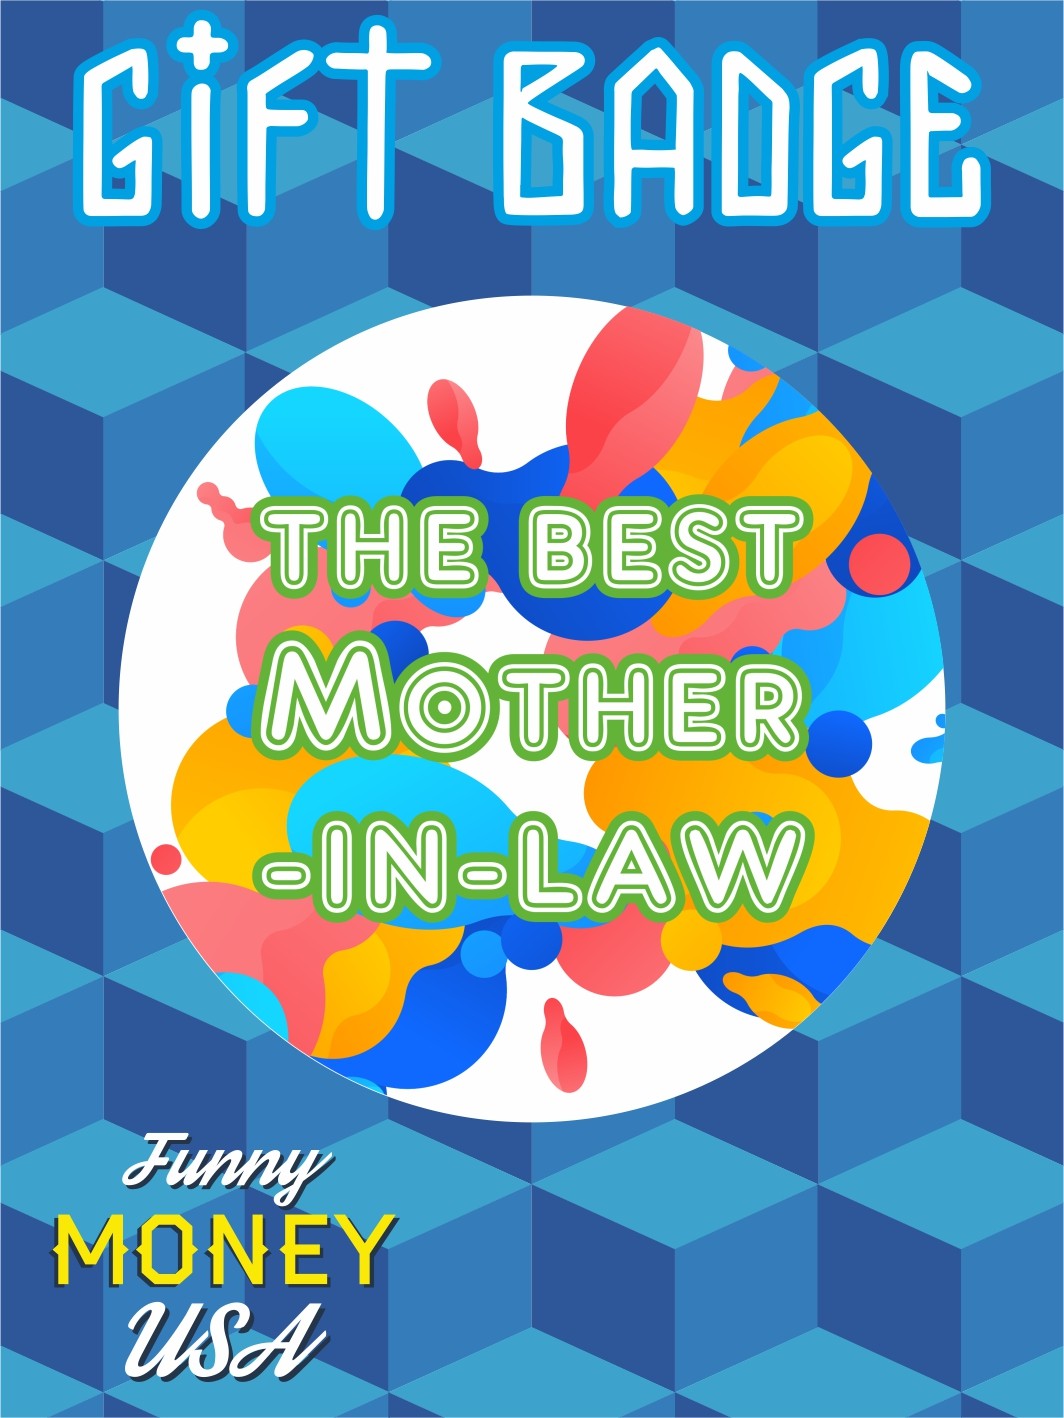 Gift badges "Best Mother in-low"2